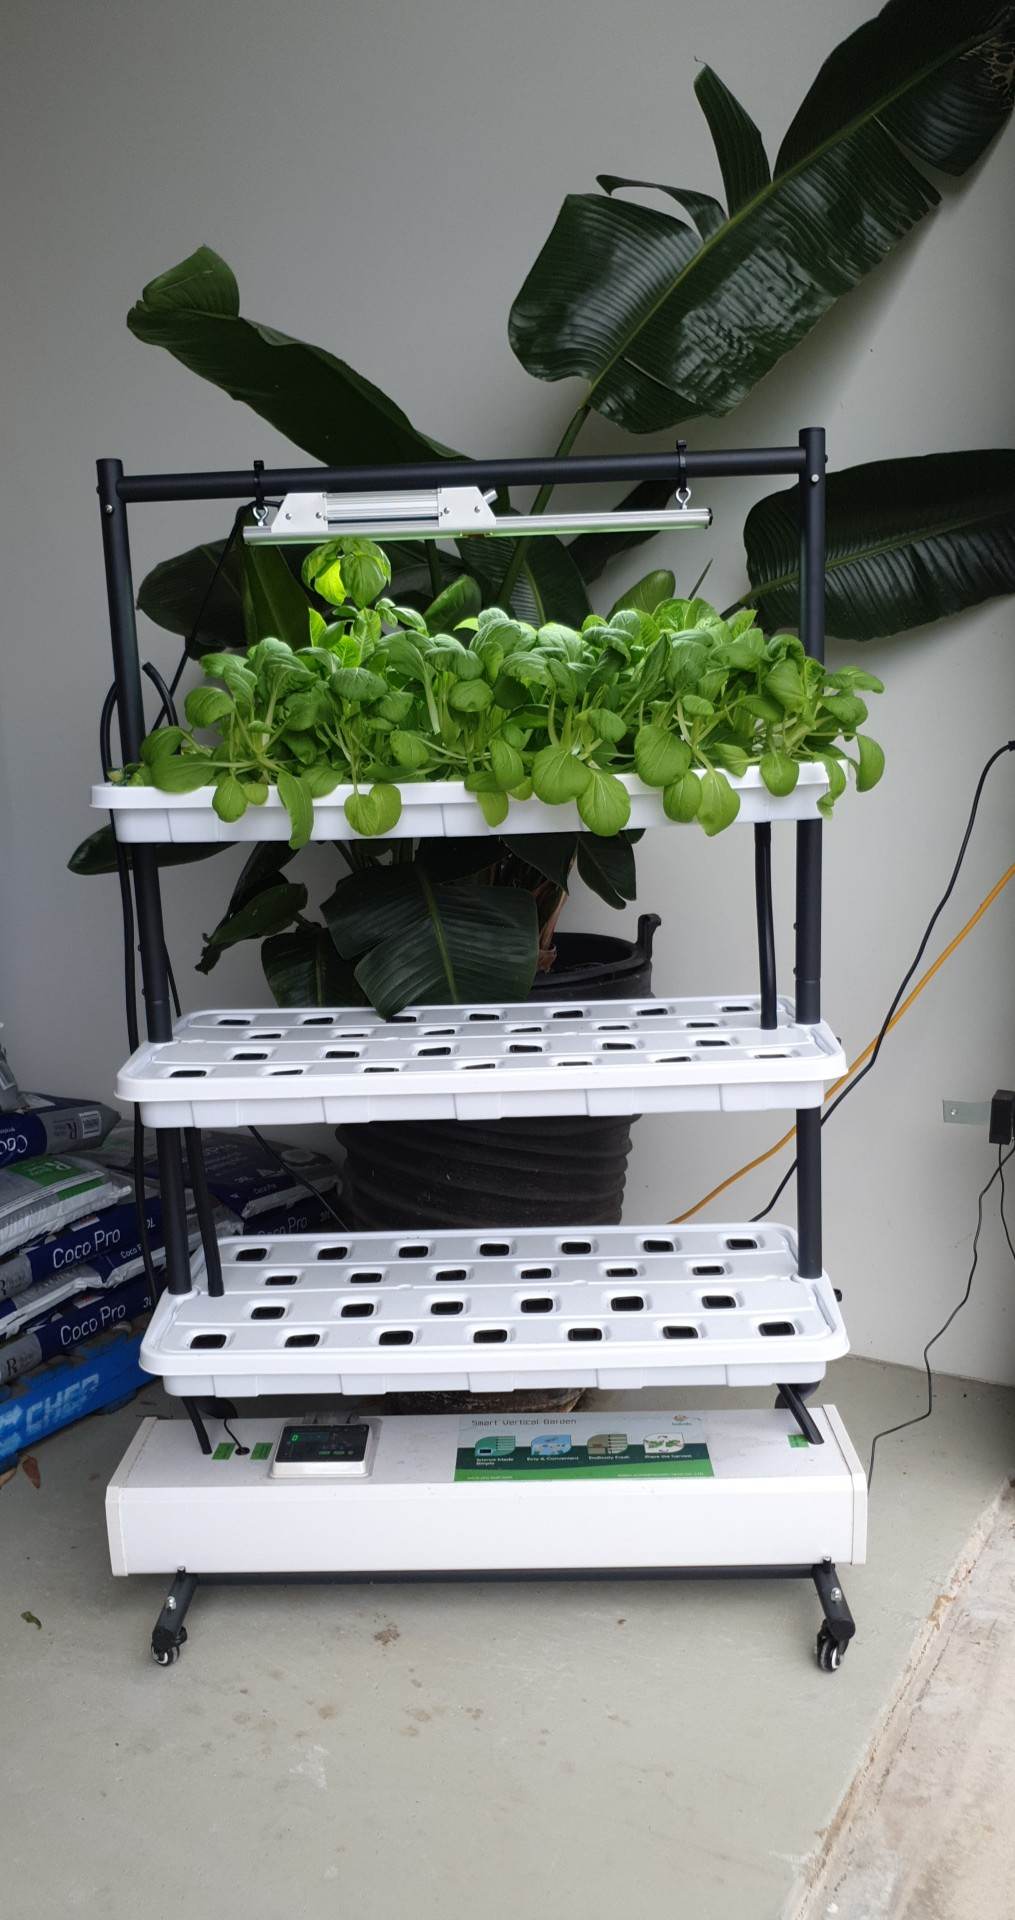 PRO LEAF SMART VERTICAL HYDROPONIC GROW SYSTEM 1600x900 | BUILT-IN IRRIGATION TIMER | NO LED